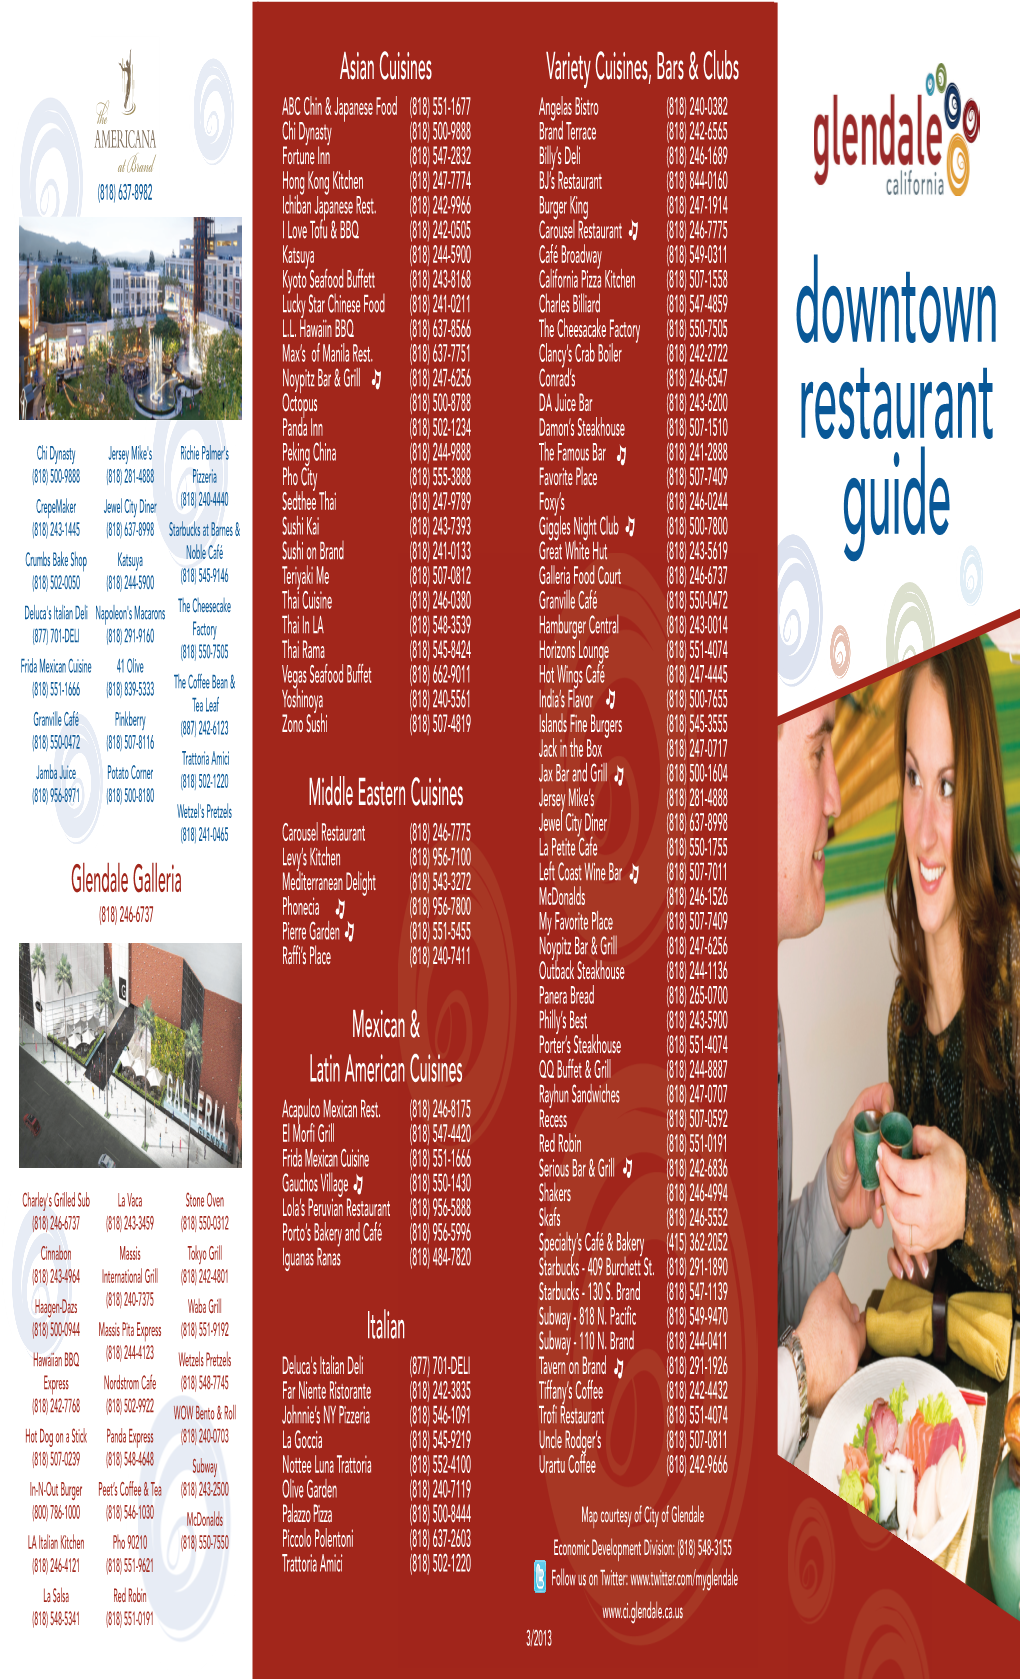 Resturant Map 2013 2/27/13 9:12 AM Page 1